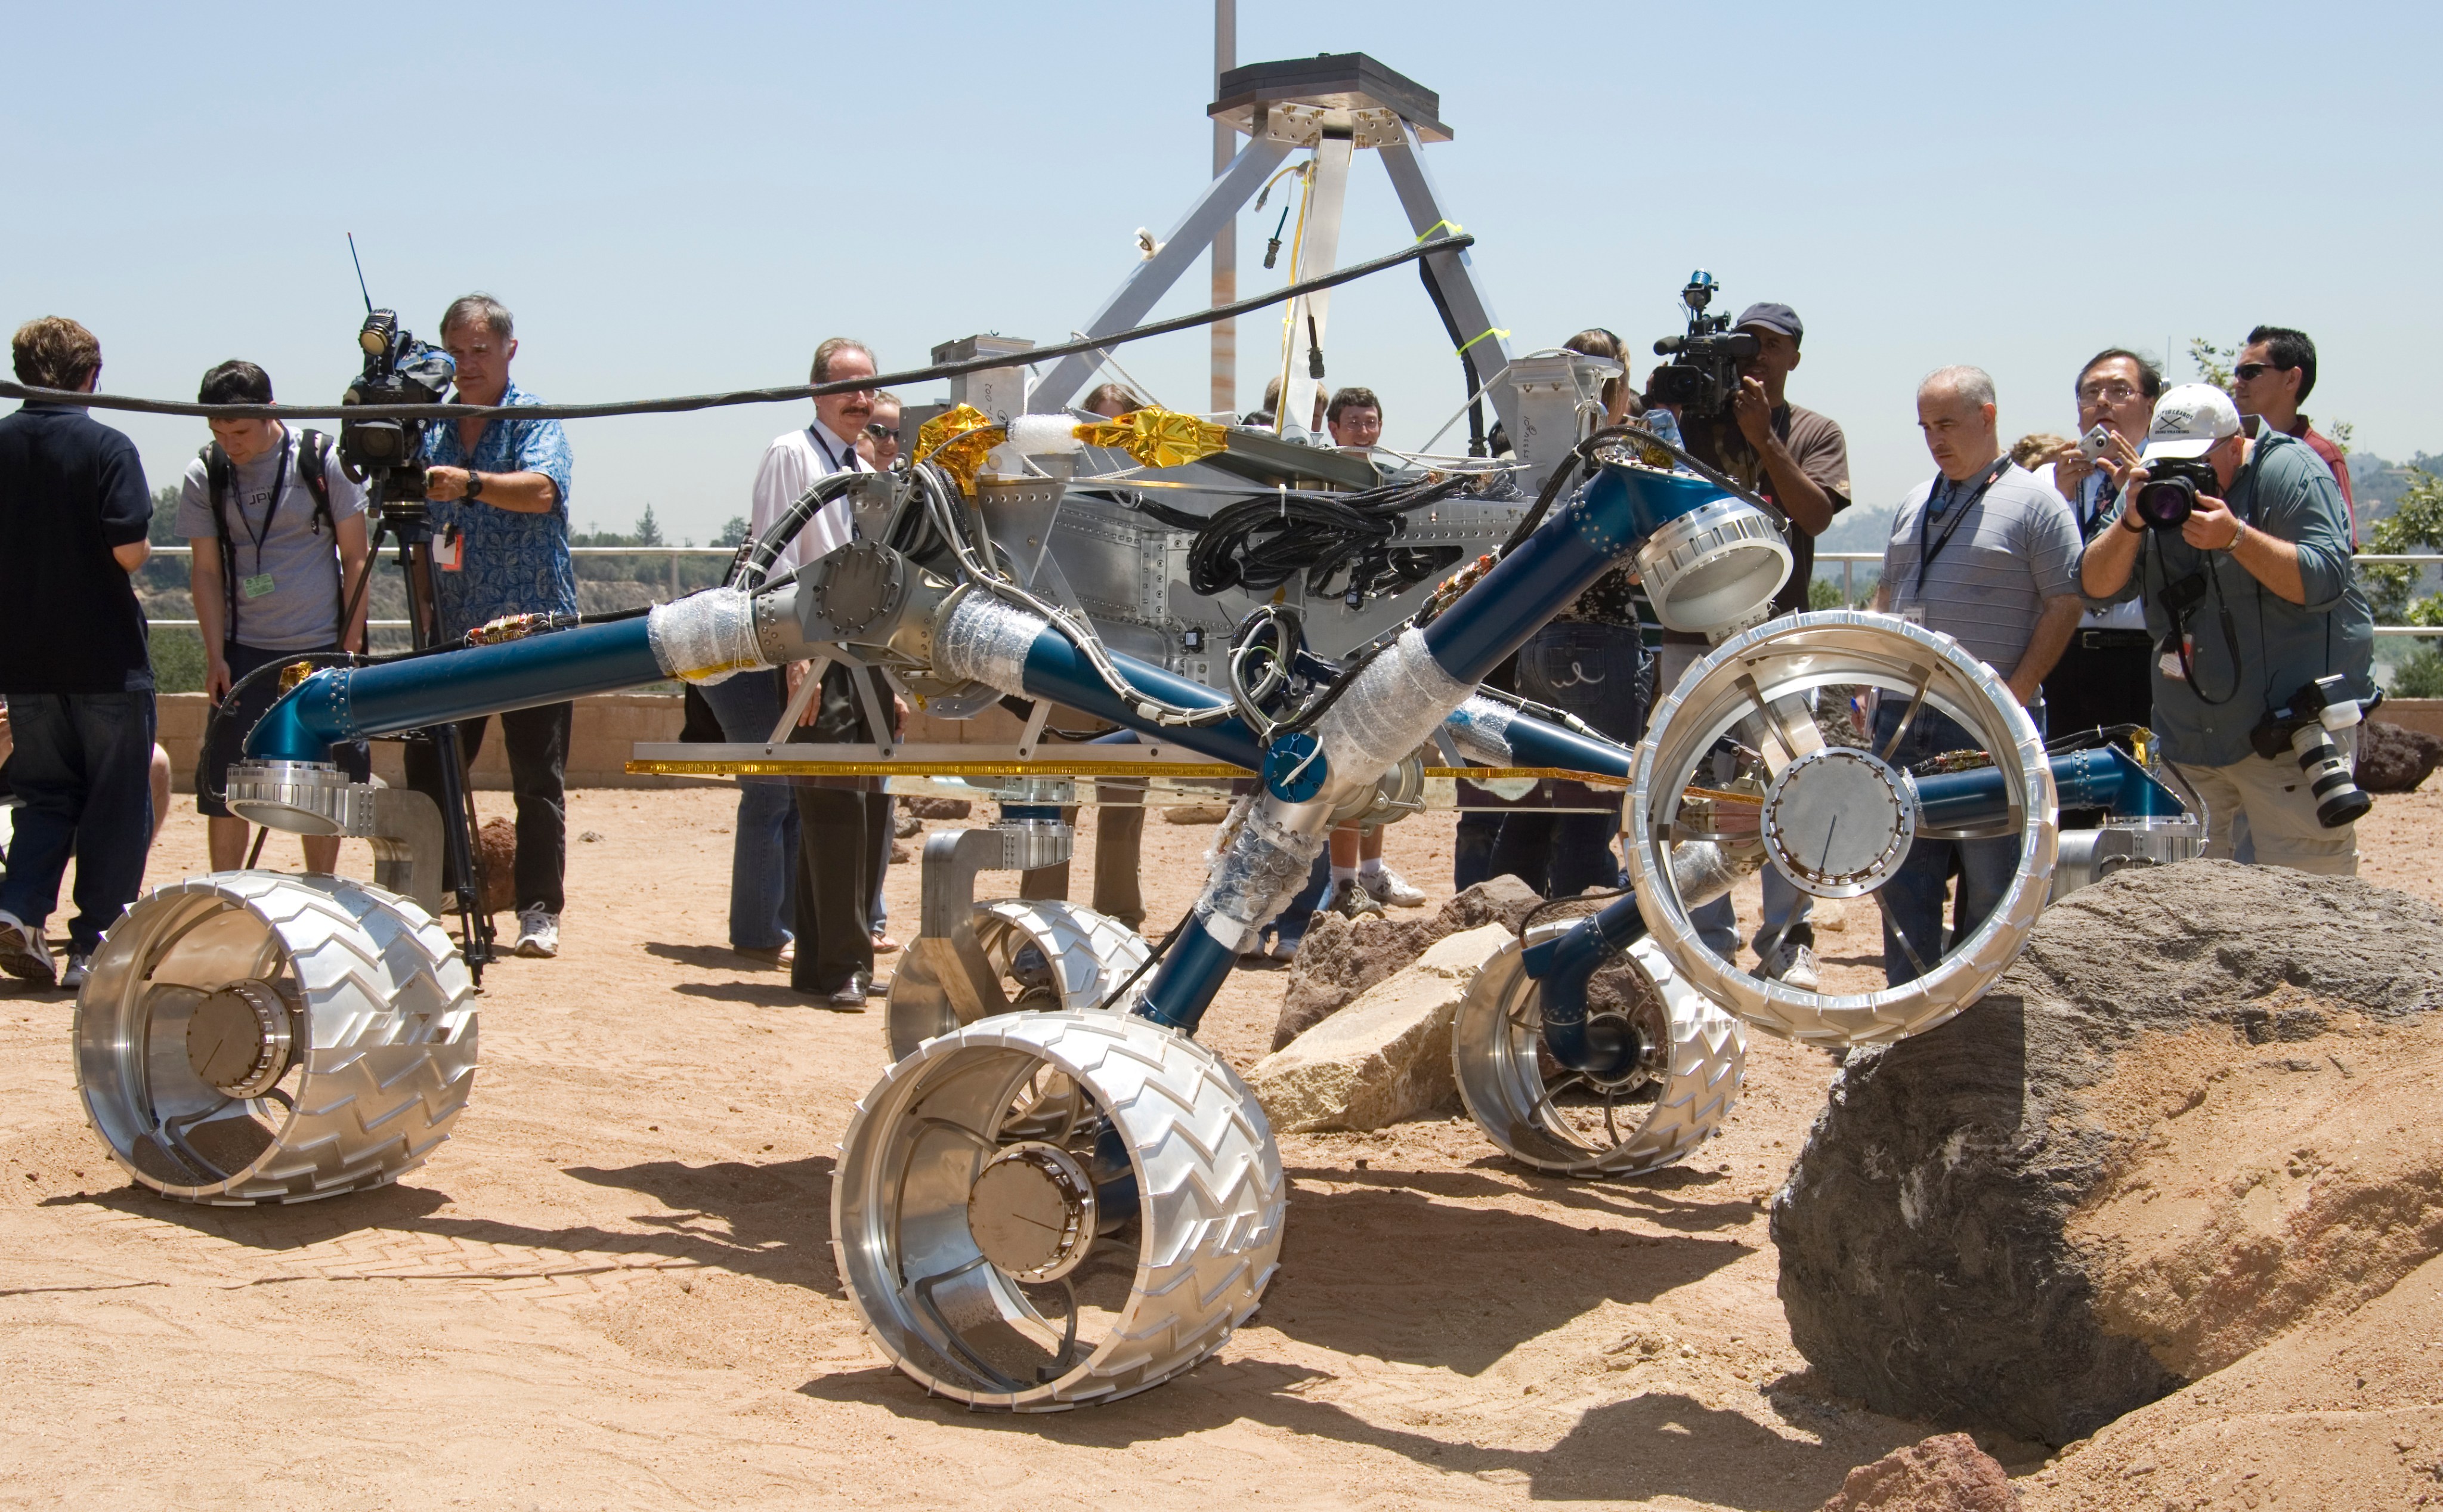 In this image, about a dozen people watch the large Scarecrow rover drive over a grayish orange boulder in an outdoor sandbox.  Scarecrow is about the size of a small compact car.  Its 'legs,' (mobility system) are a vibrant blue color and its large wheels are silver and covered in chevron-like cleats.  Members of the media hold cameras.